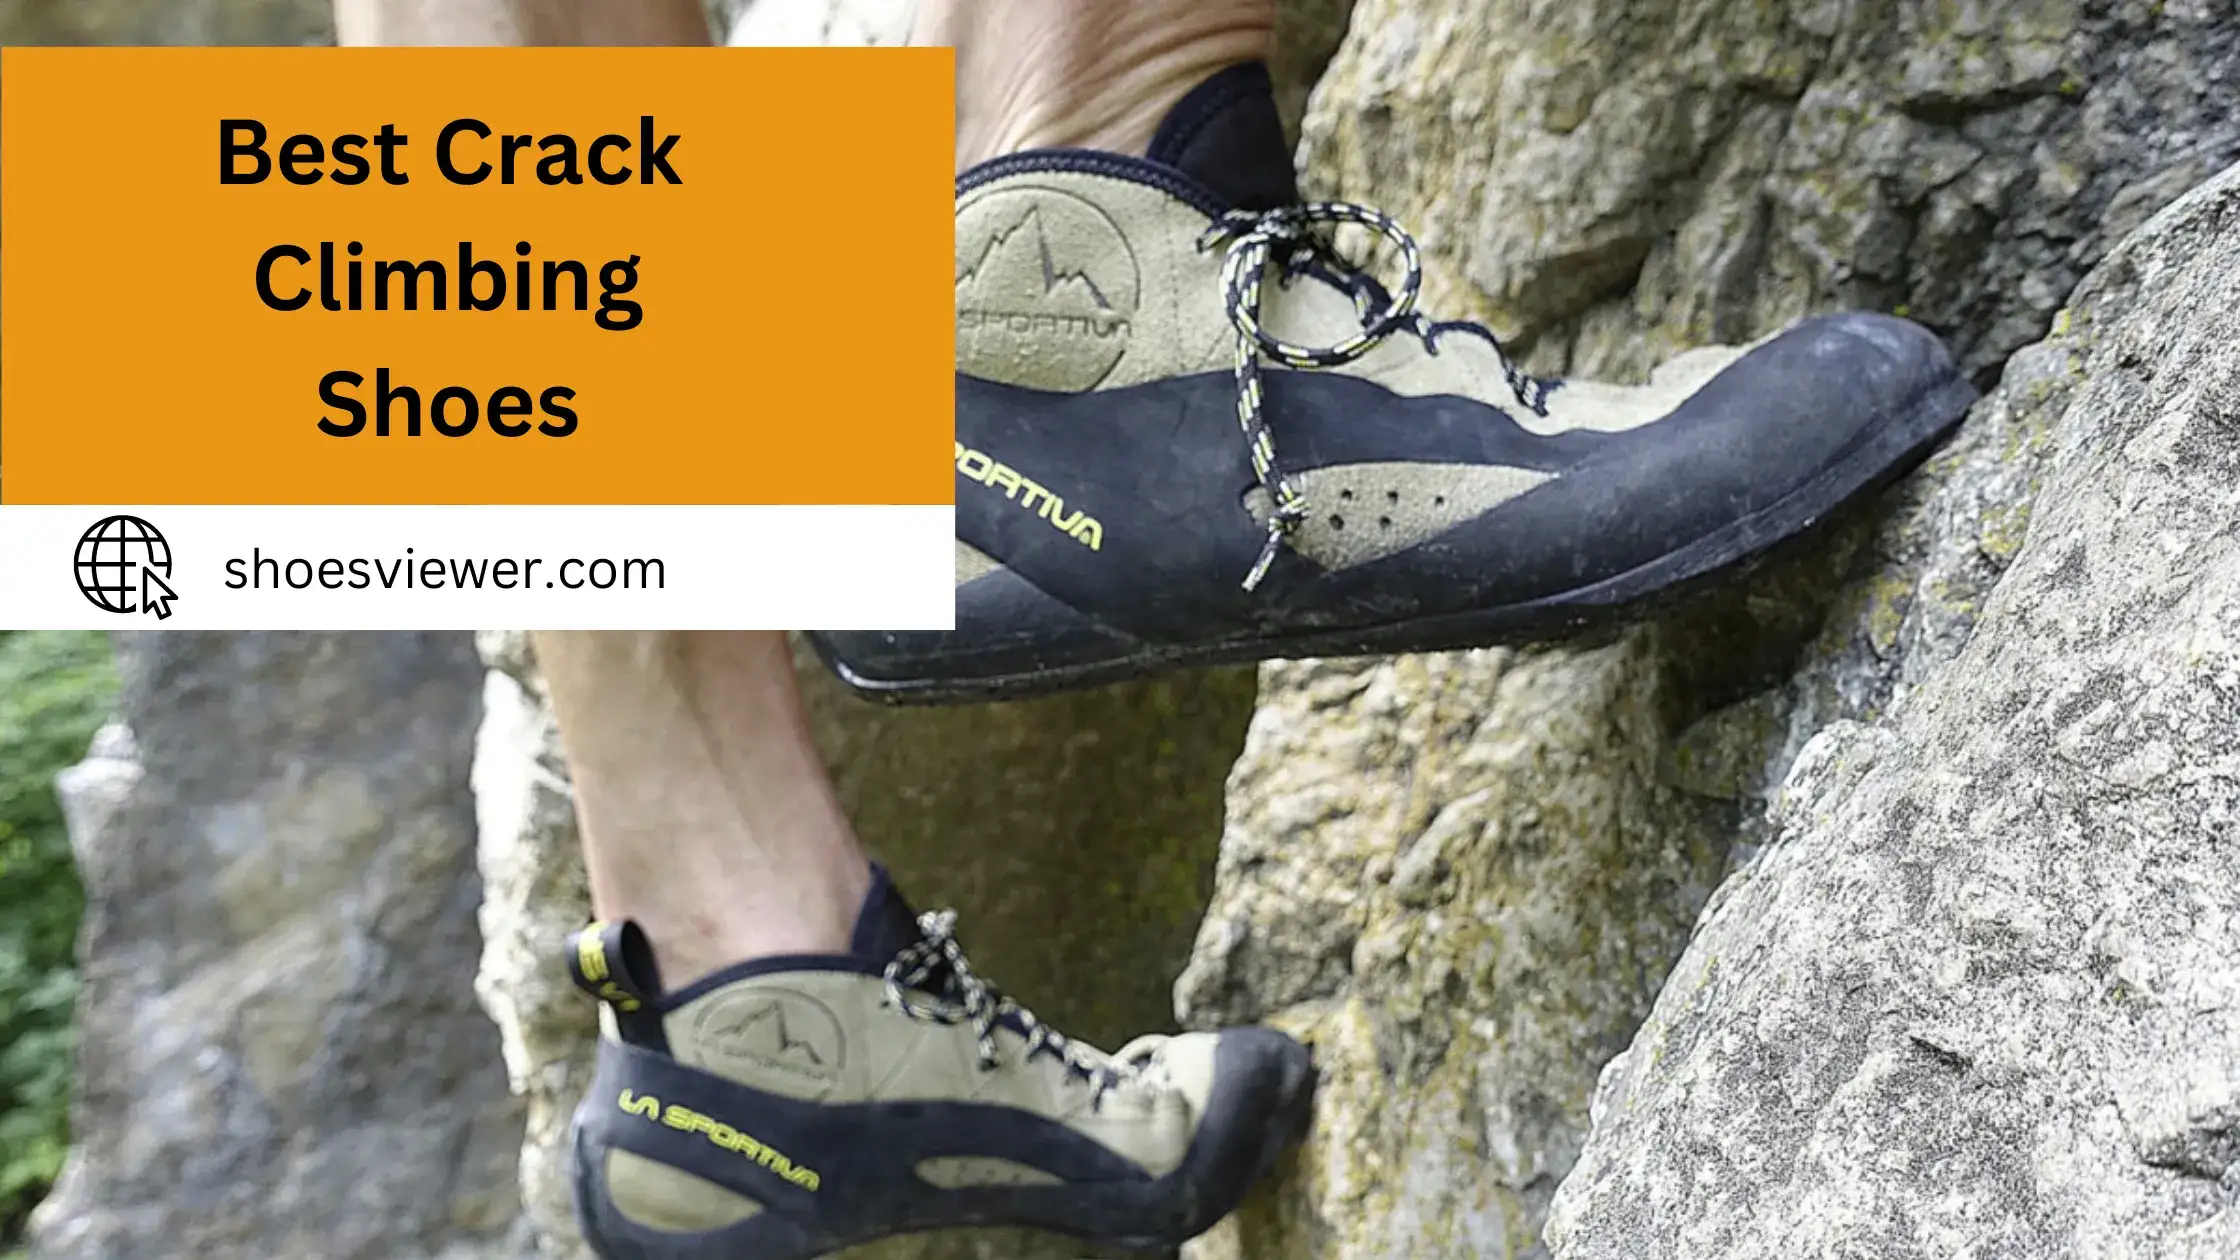 Best Crack Climbing Shoes - A Comprehensive Guide